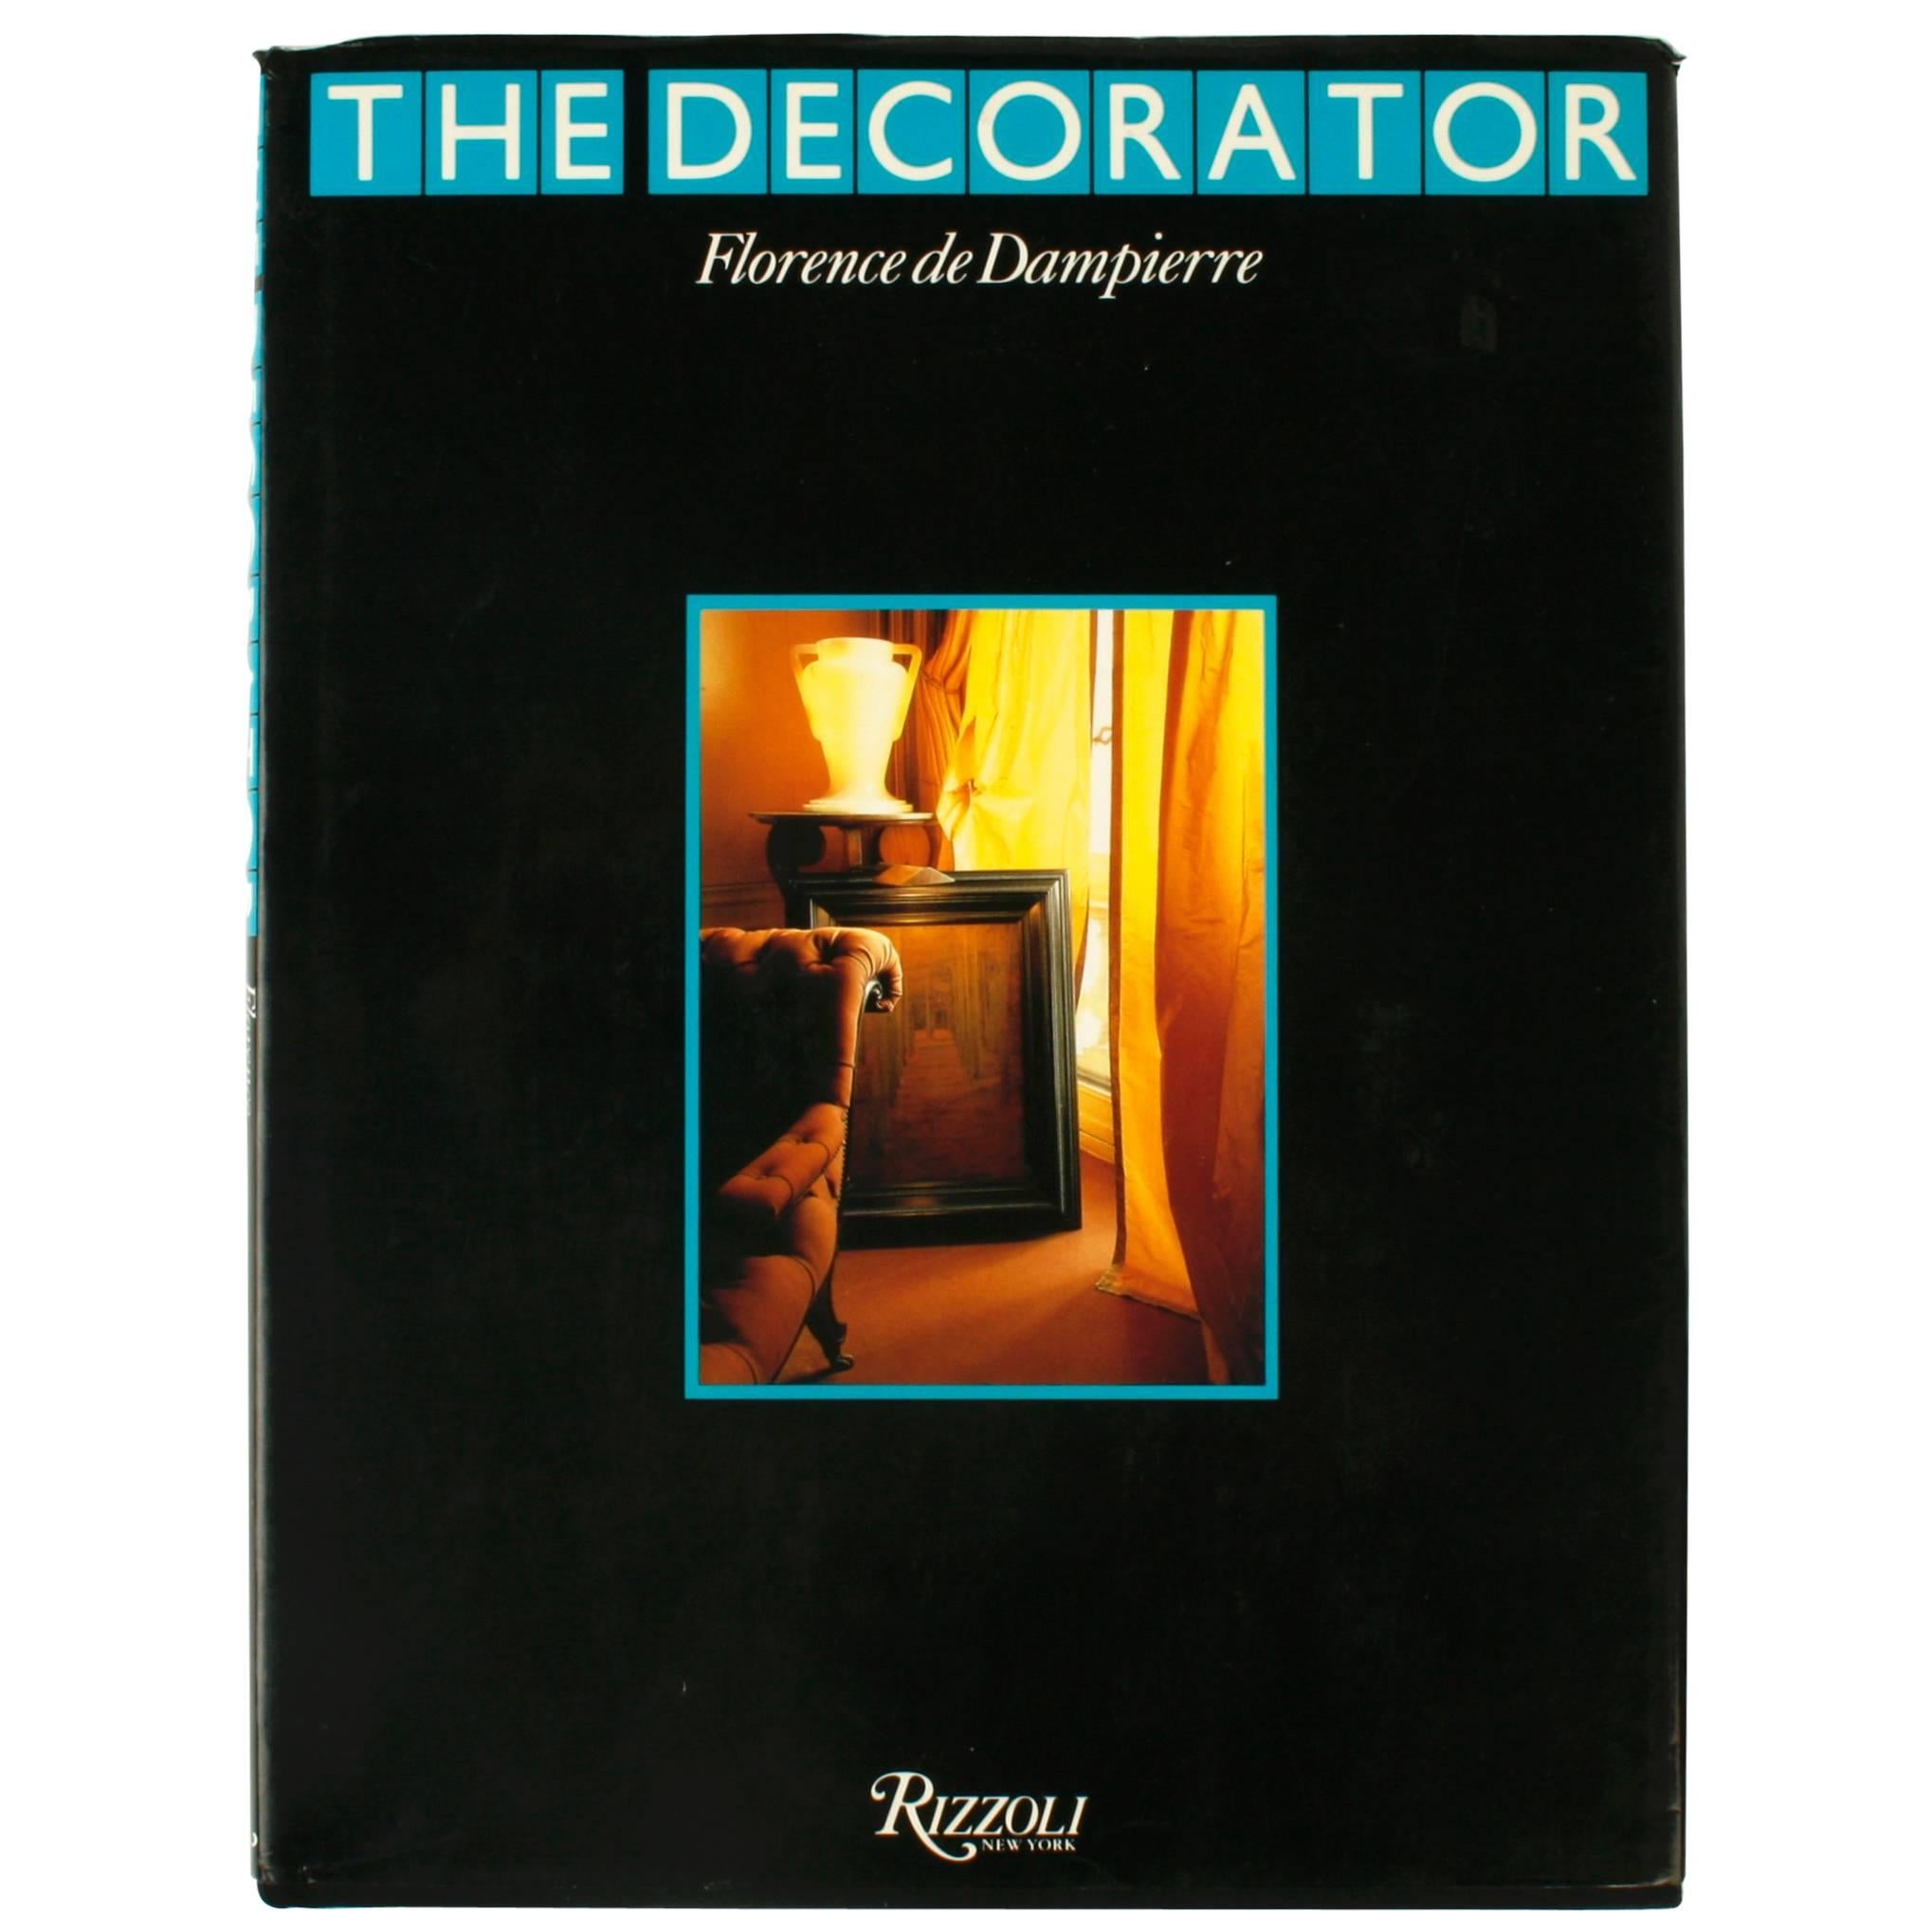 The Decorator, First Edition by Florence de Dampierre